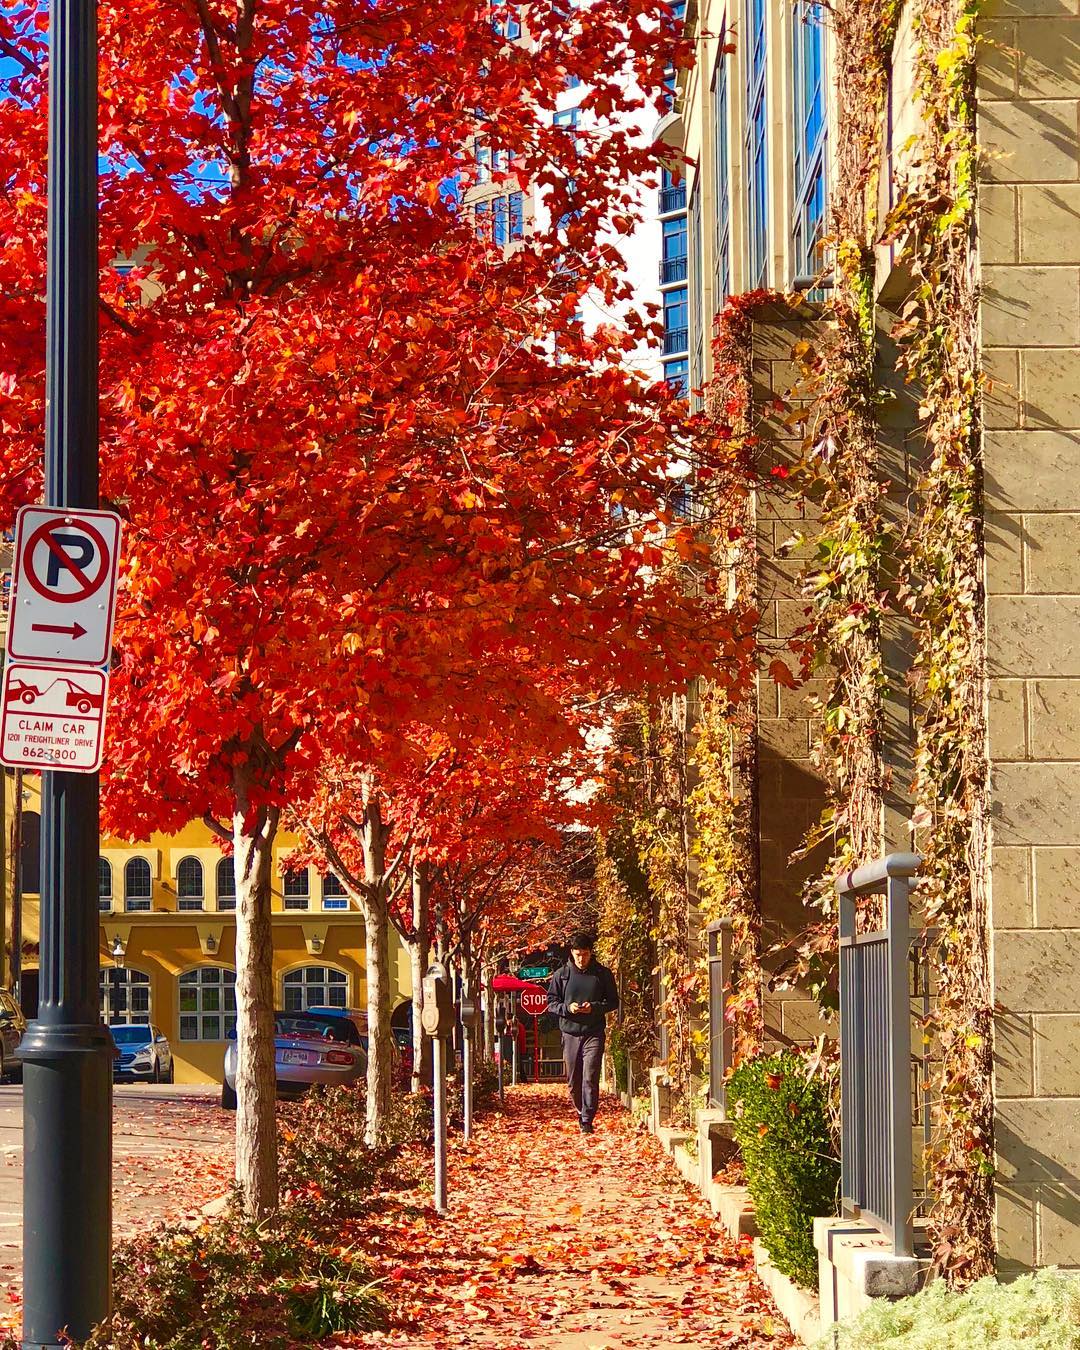 Sidewalk in Midtown Nashville with red and orange leaves during fall. Photo from Instagram user @ms.alberto_styling.